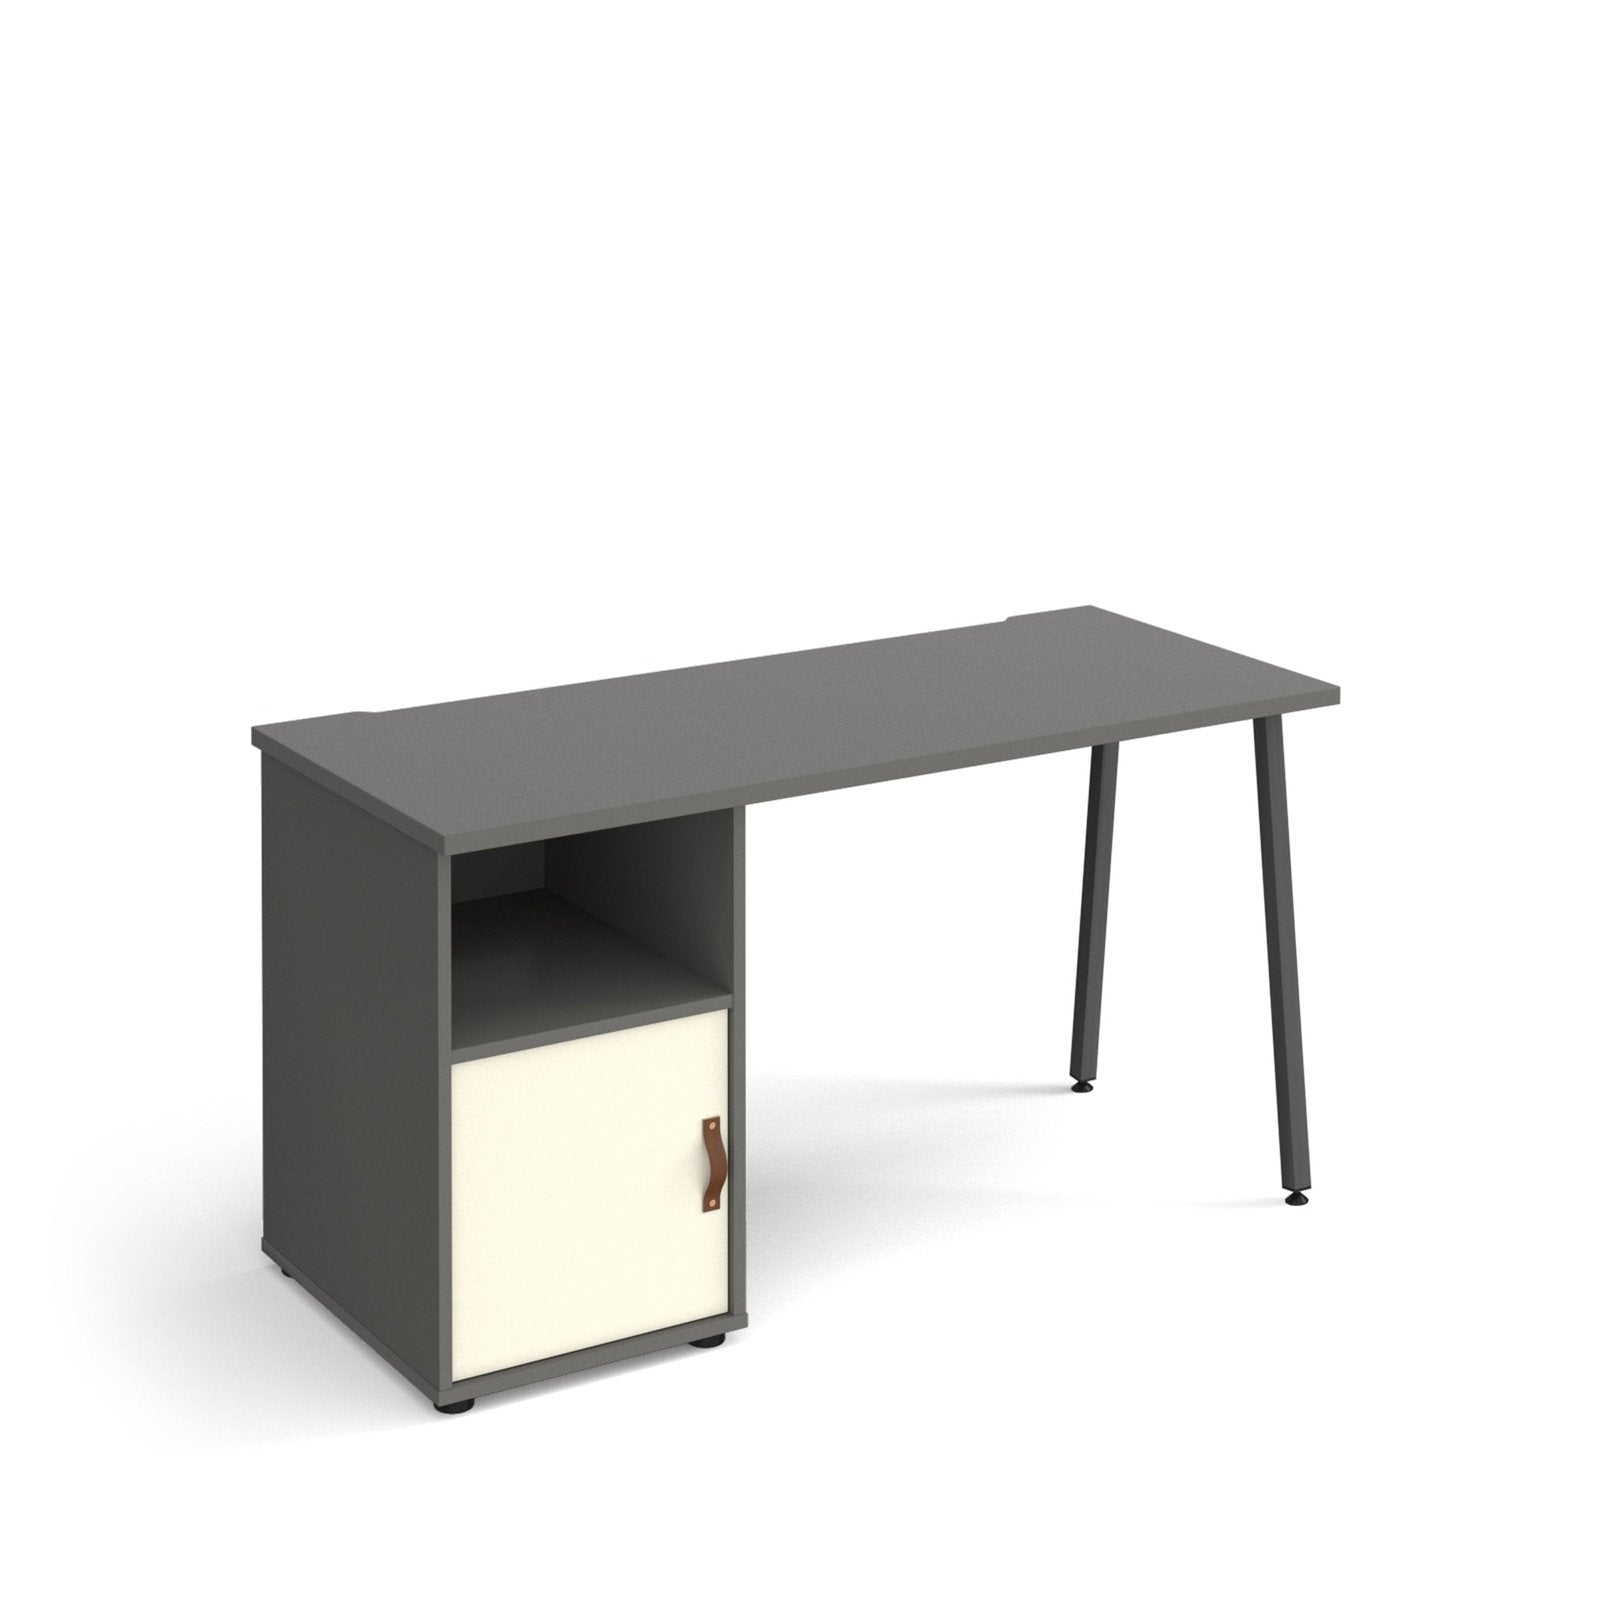 Sparta straight desk with A-frame leg and support pedestal - Office Products Online